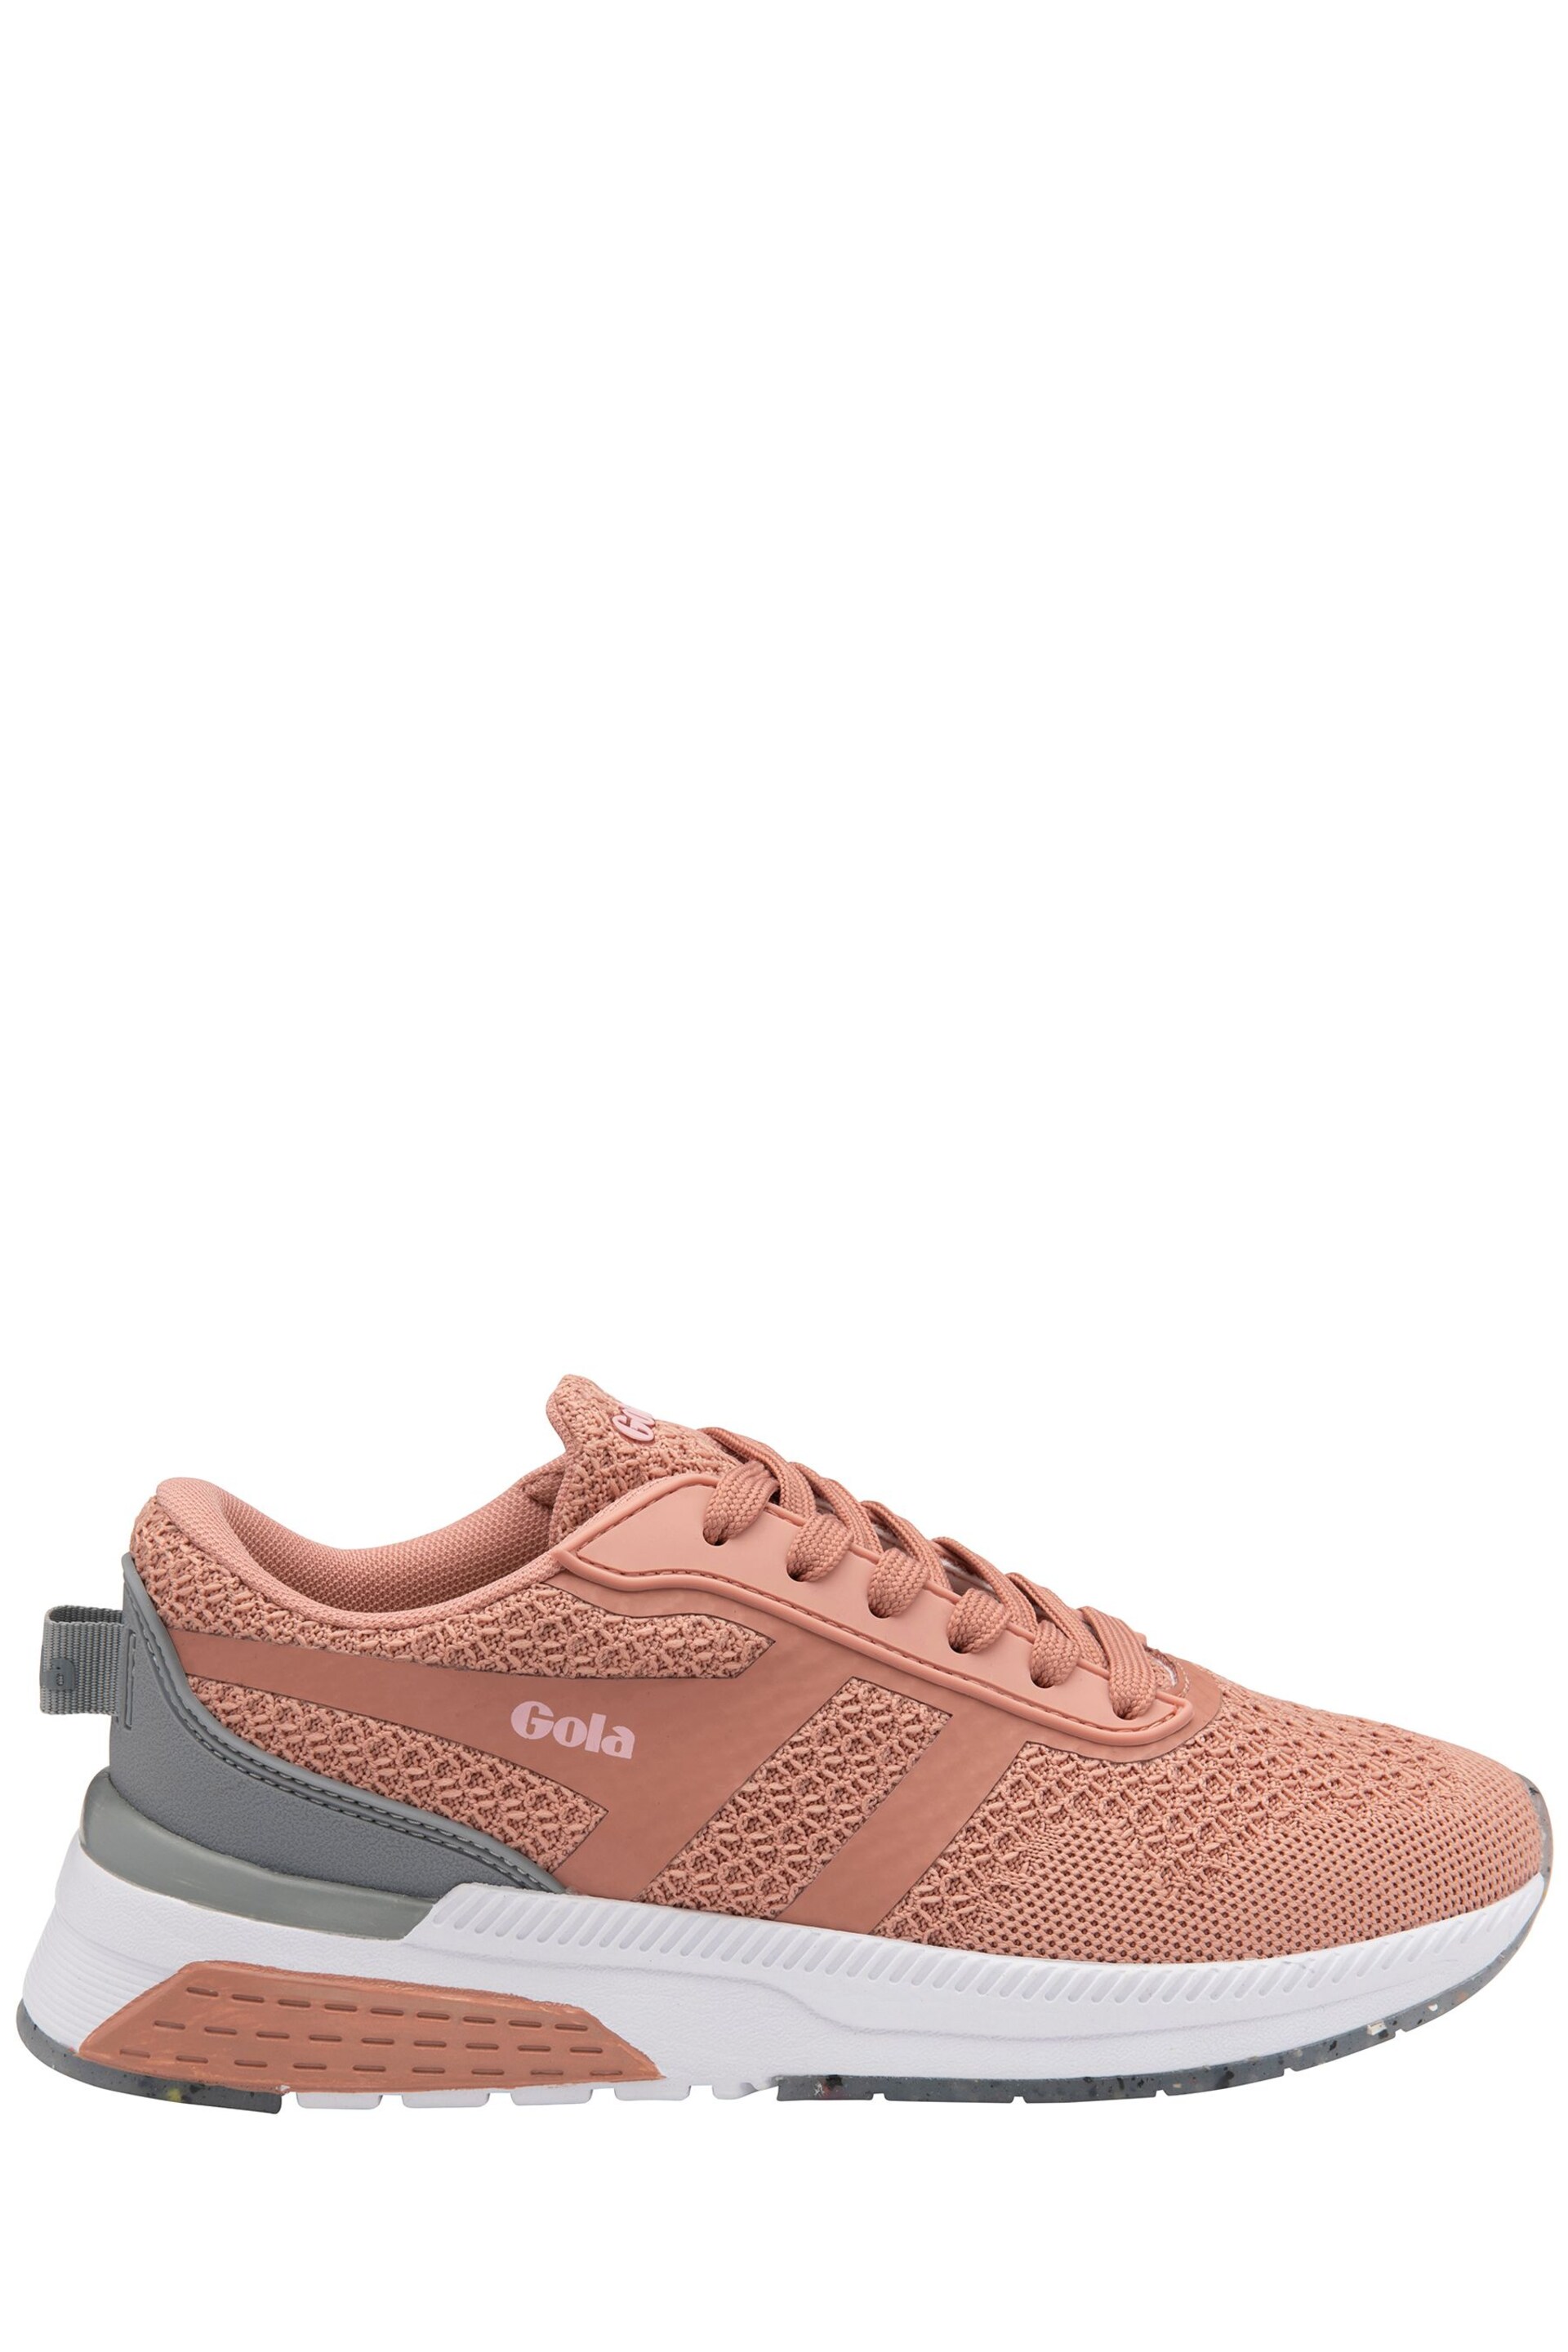 Gola Pink Atomics 2 Mesh Lace-Up Ladies Training Trainers - Image 1 of 4